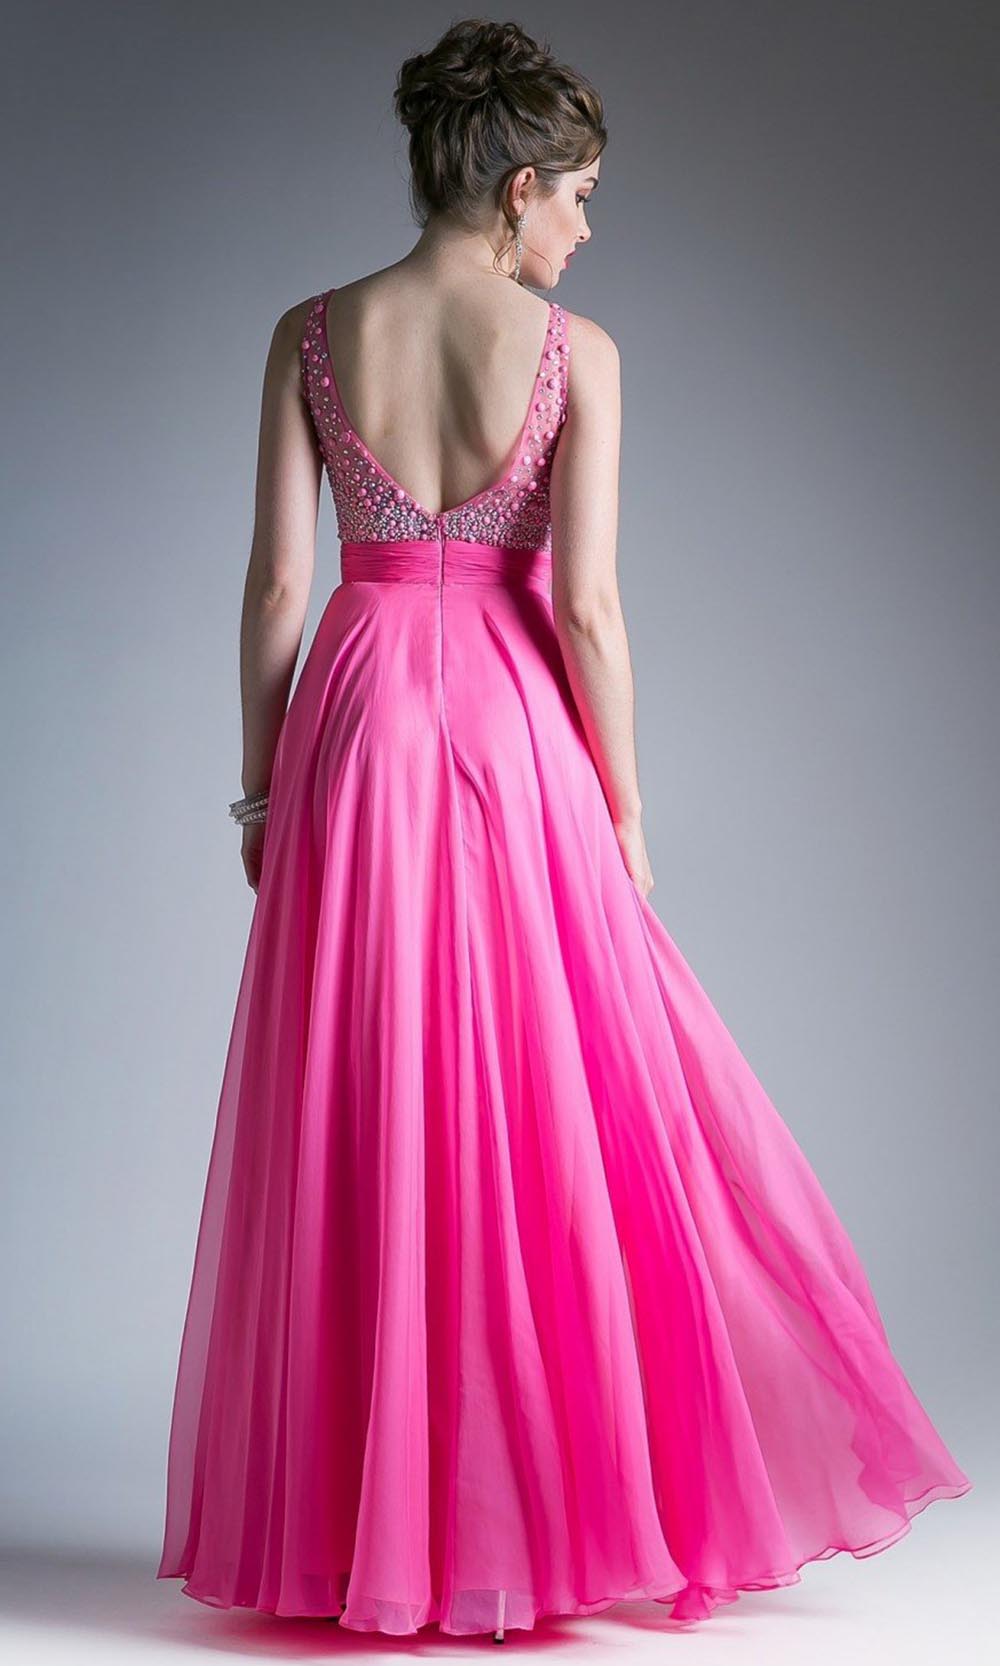 Ladivine - C255 Fully Beaded Bodice A-Line Gown In Pink